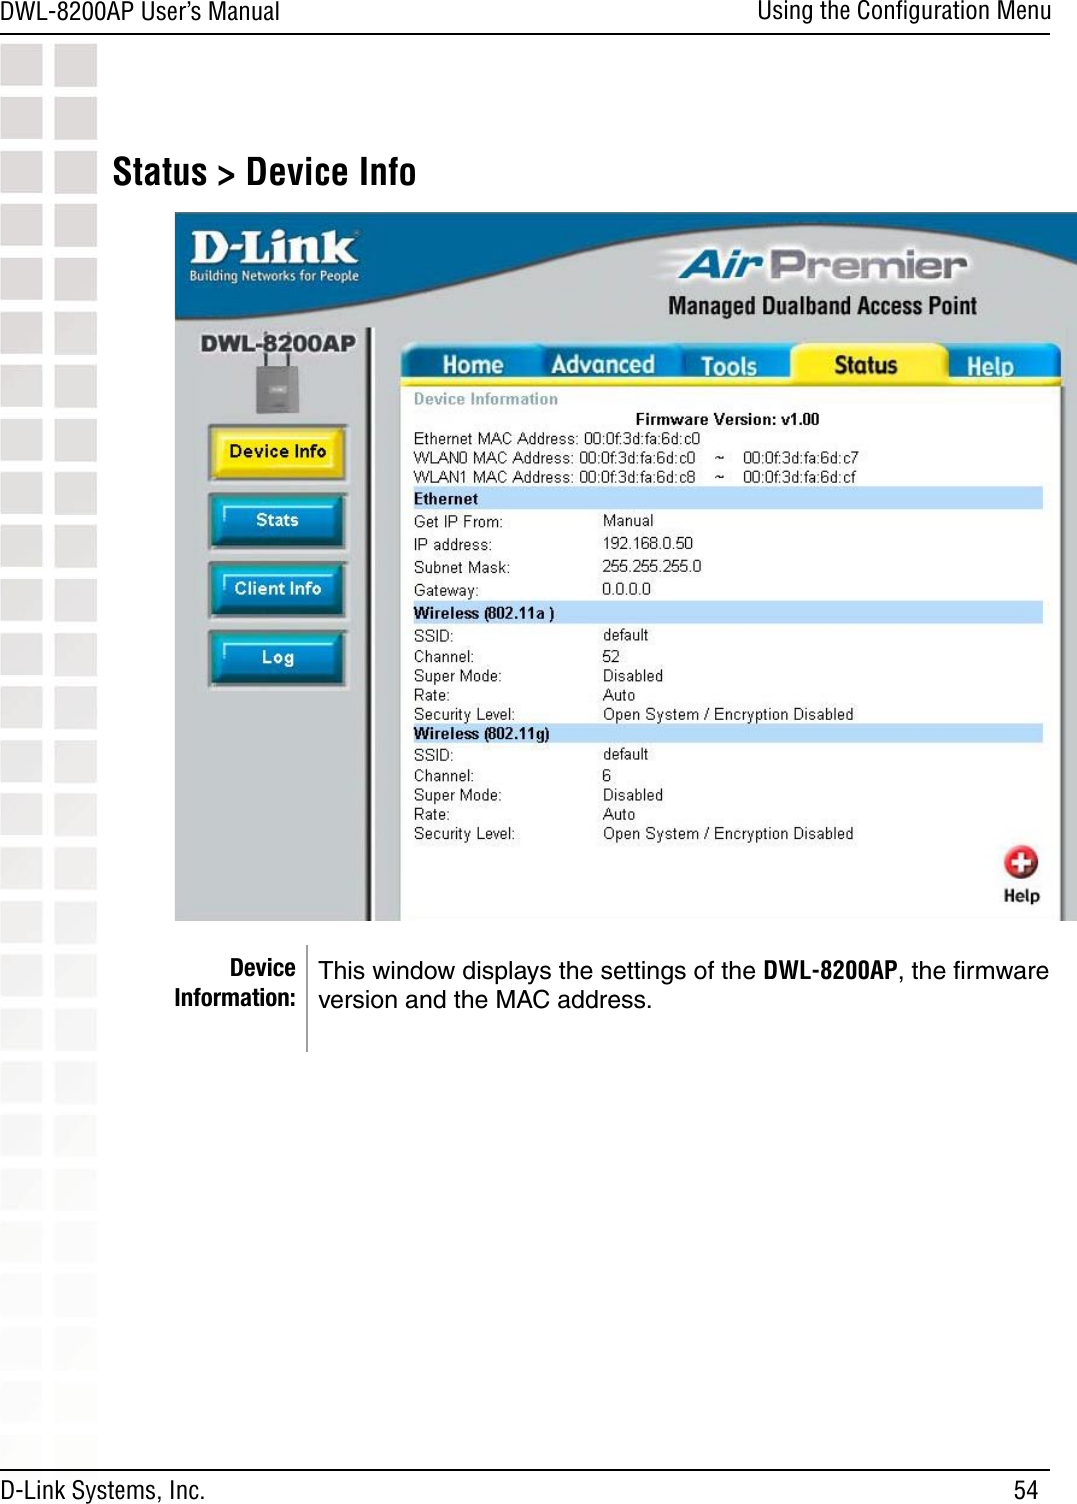 54DWL-8200AP User’s ManualD-Link Systems, Inc.Using the Conﬁguration MenuStatus &gt; Device InfoDevice Information:This window displays the settings of the DWL-8200AP, the ﬁrmware version and the MAC address.